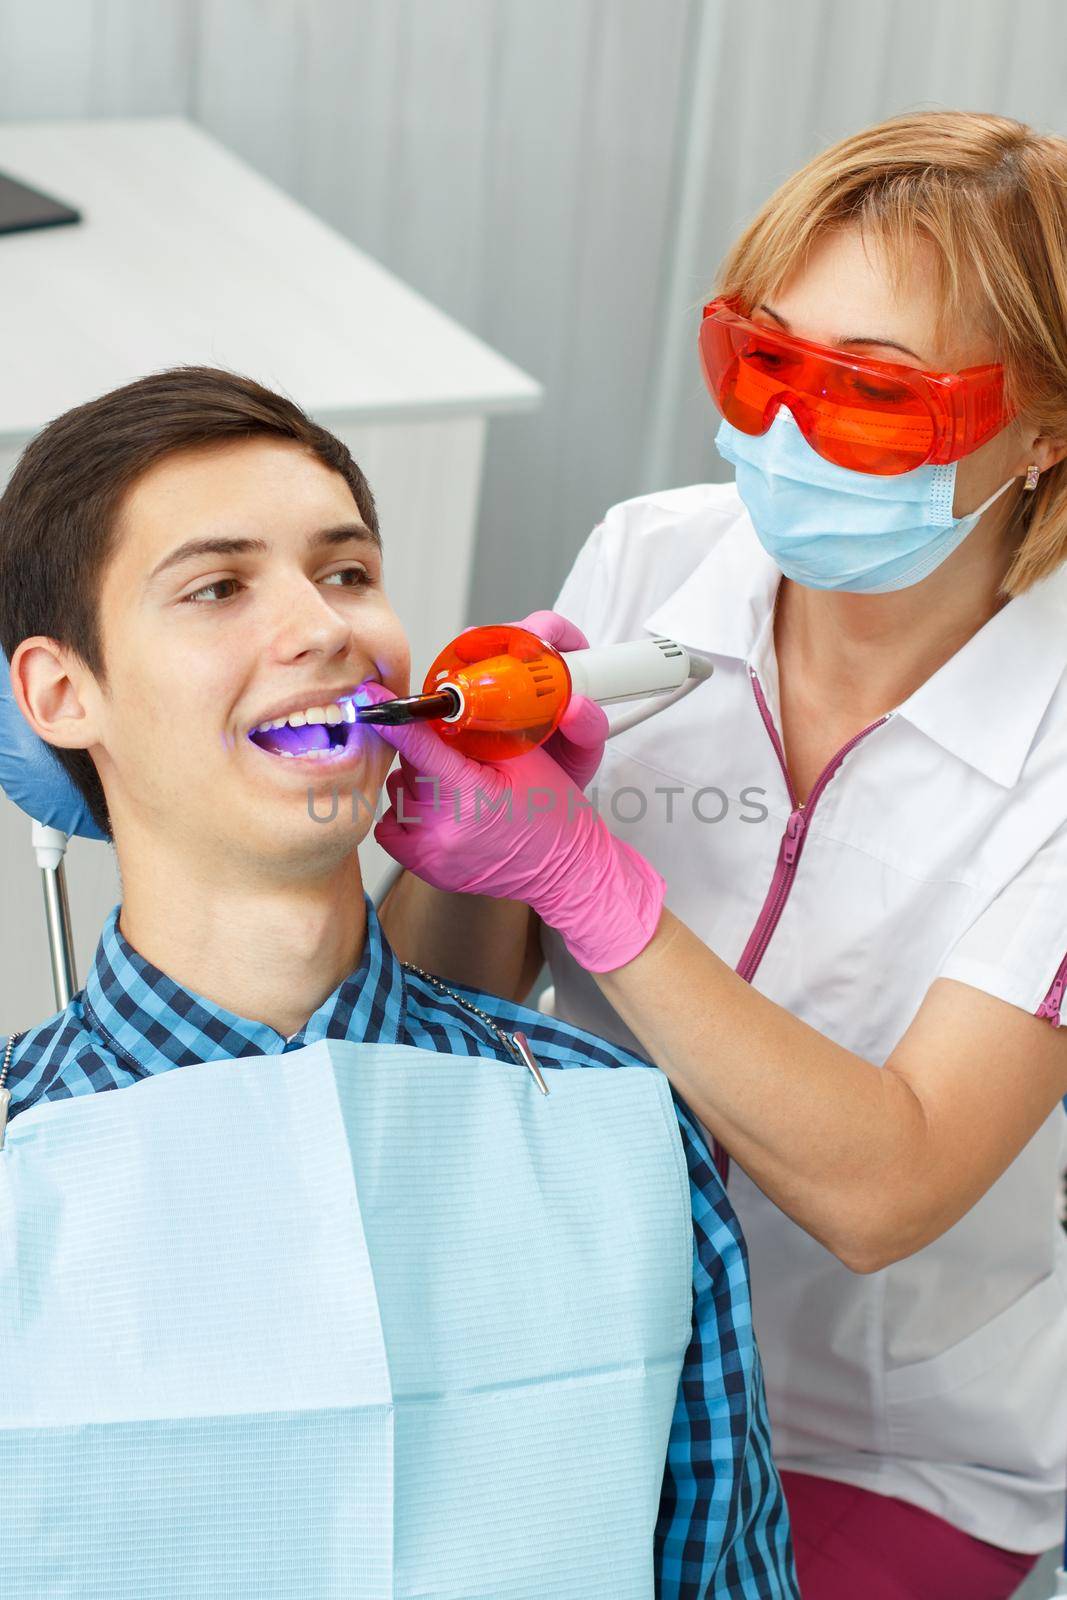 Beautiful woman dentist treating a patient teeth in dental office. Doctor wearing glasses, mask, white uniform and pink gloves. Dentistry